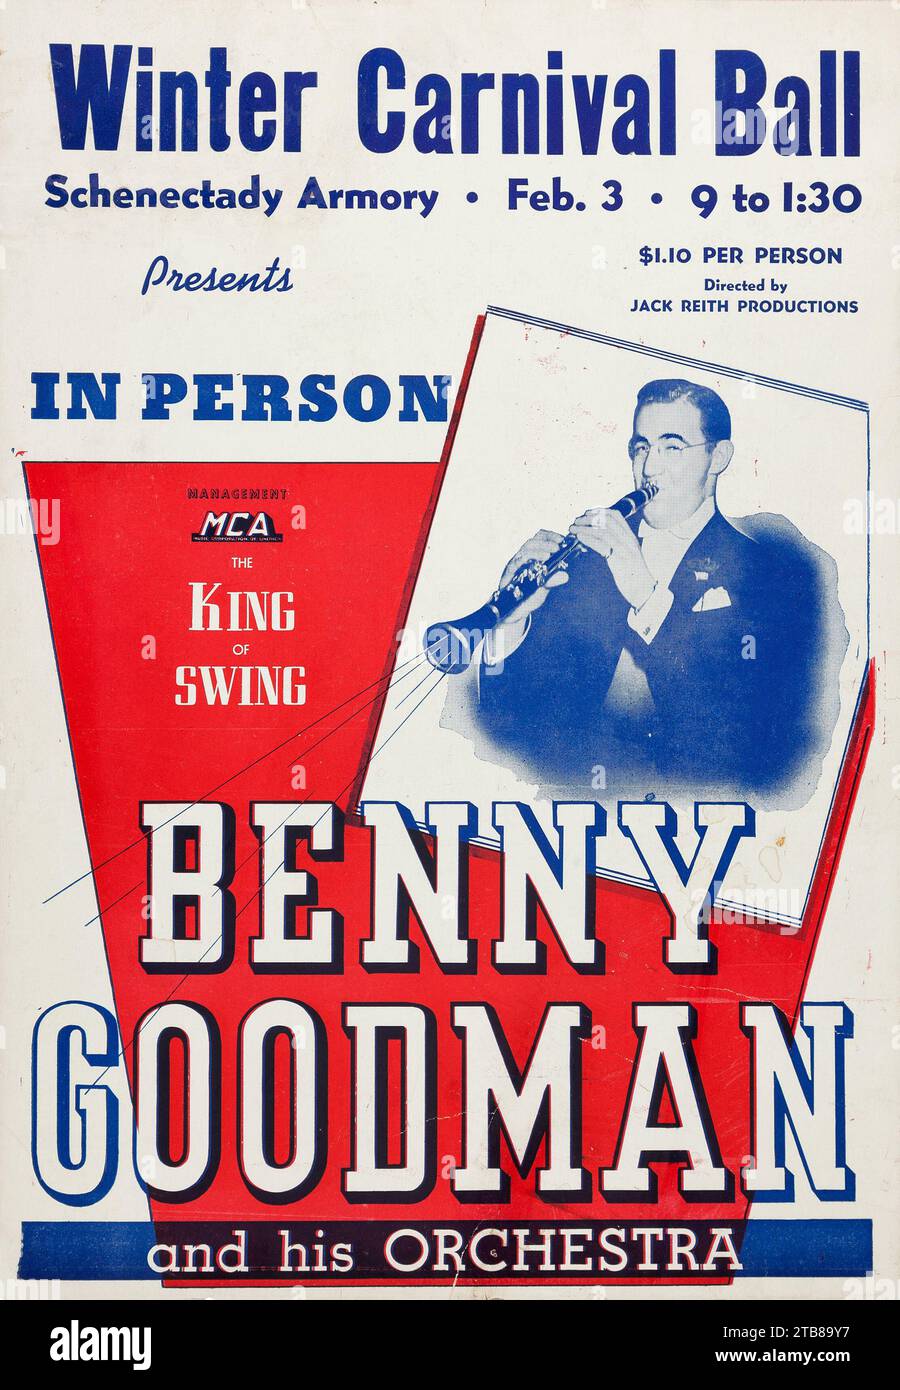 Vintage Jazz poster - Benny Goodman and his Orchestra - Schenectady Armory Concert Poster (Jack Reith Productions, circa 1940) Winter Carnival Ball Stock Photo